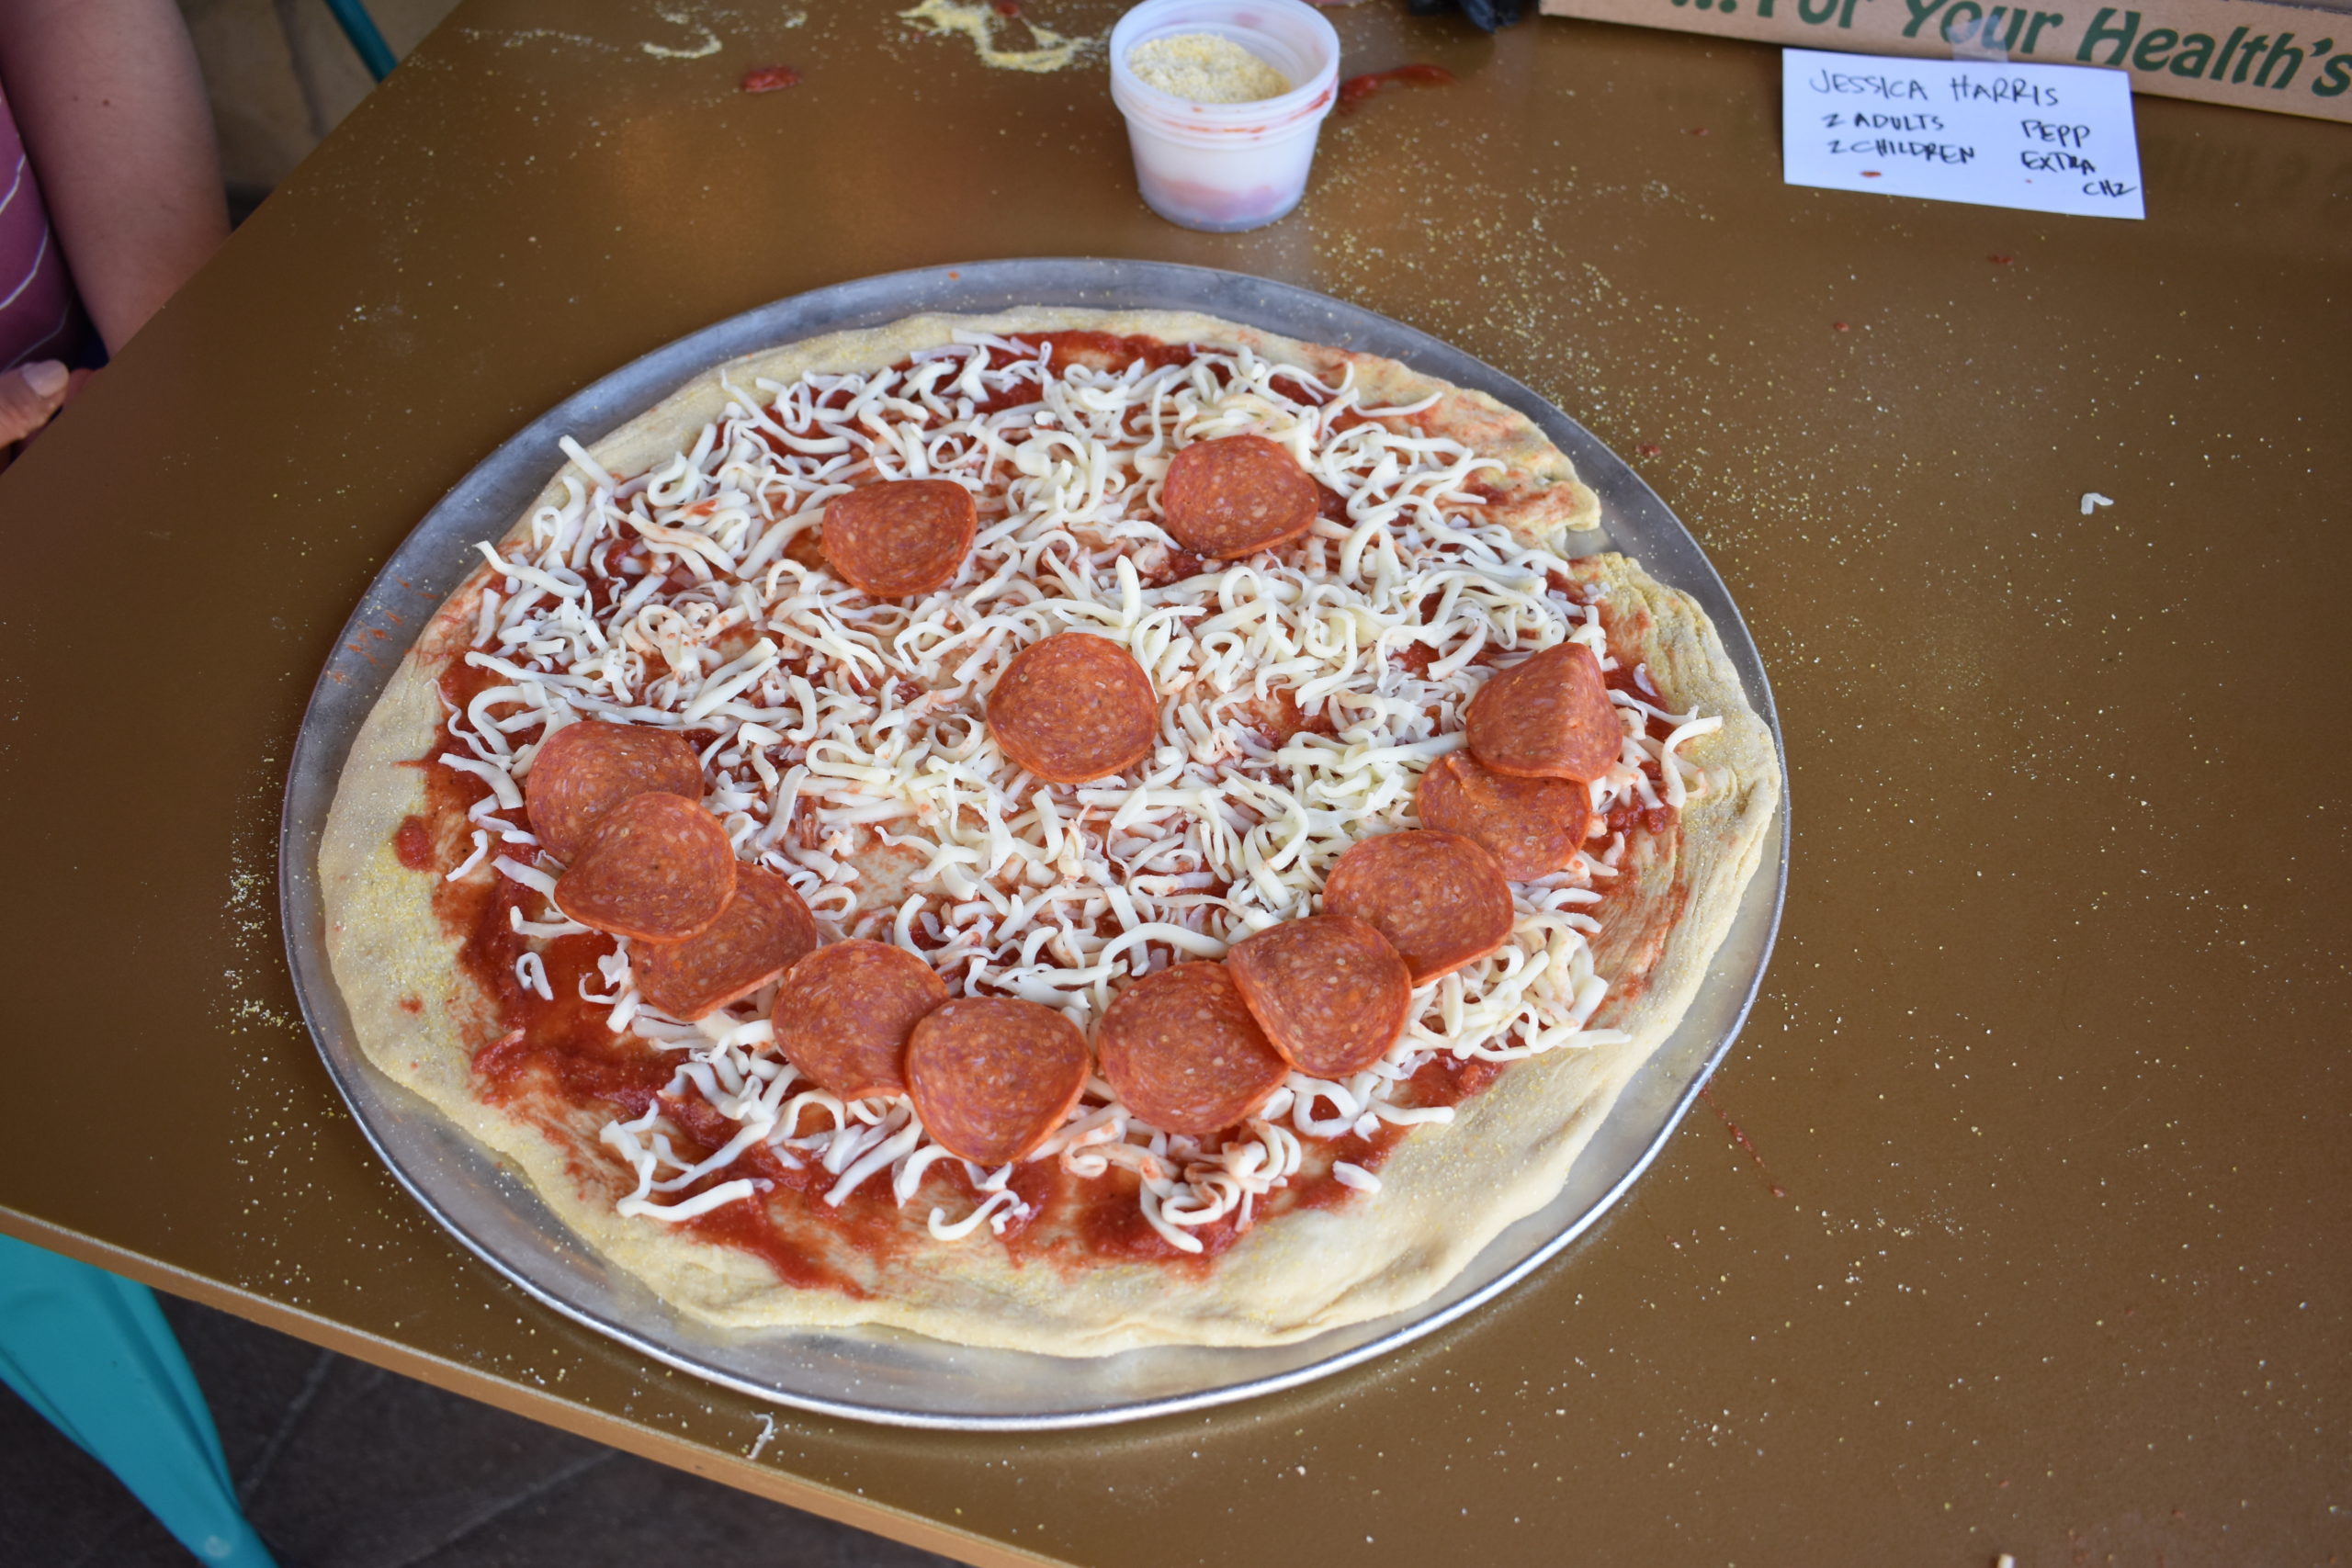 Image a pizza with eyes, nose and mouth made out of pepperoni